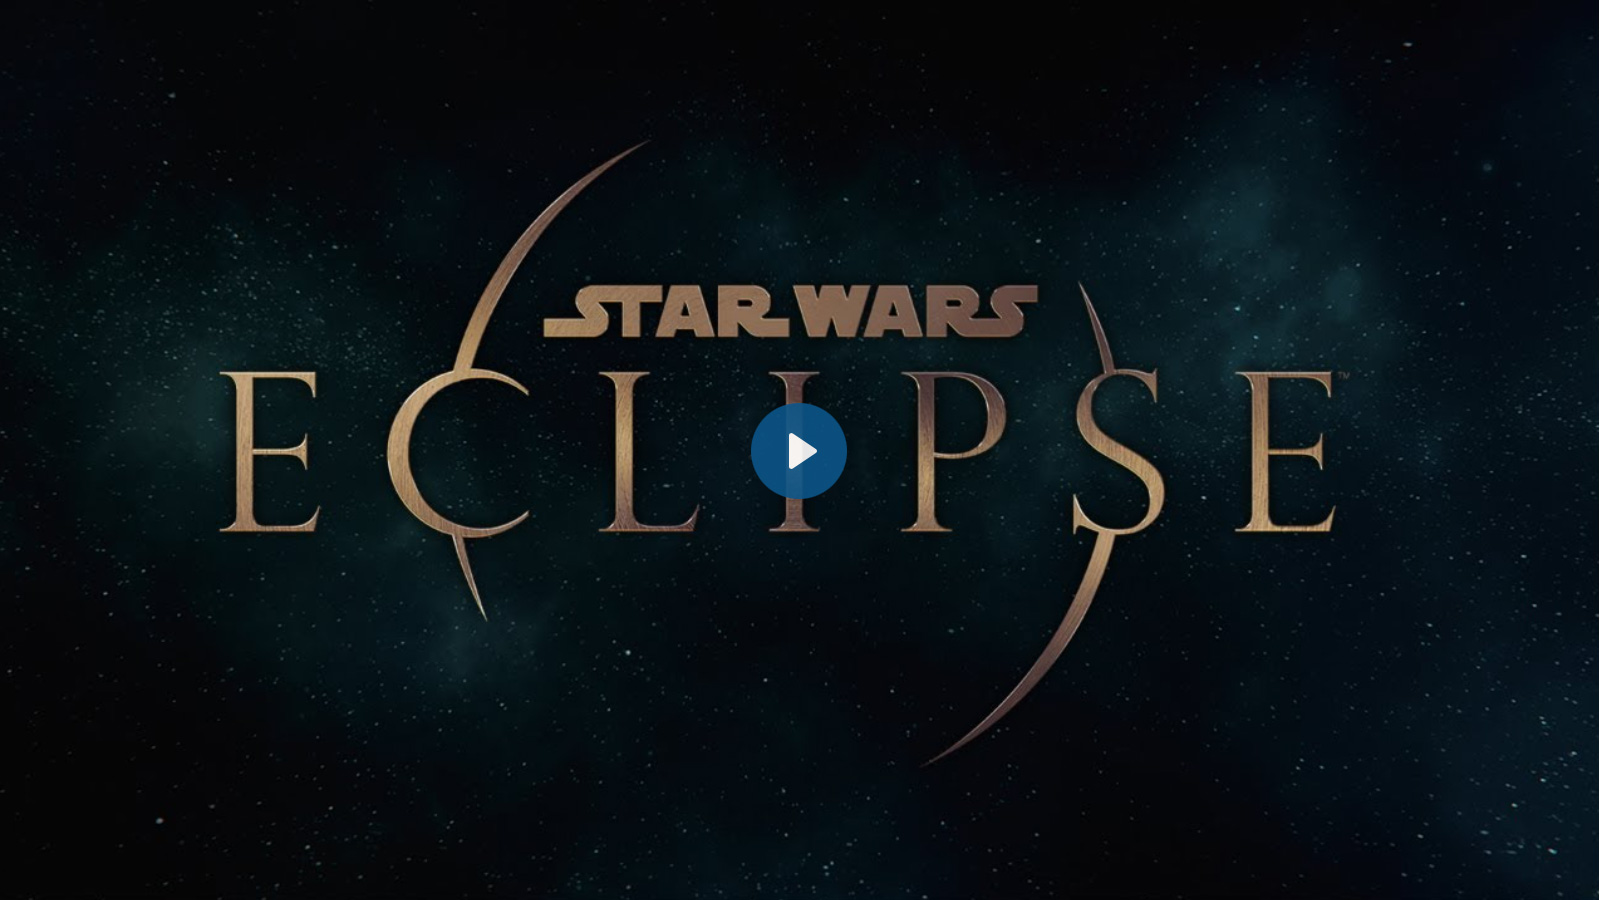 Star Wars Eclipse – Official Cinematic Reveal Trailer